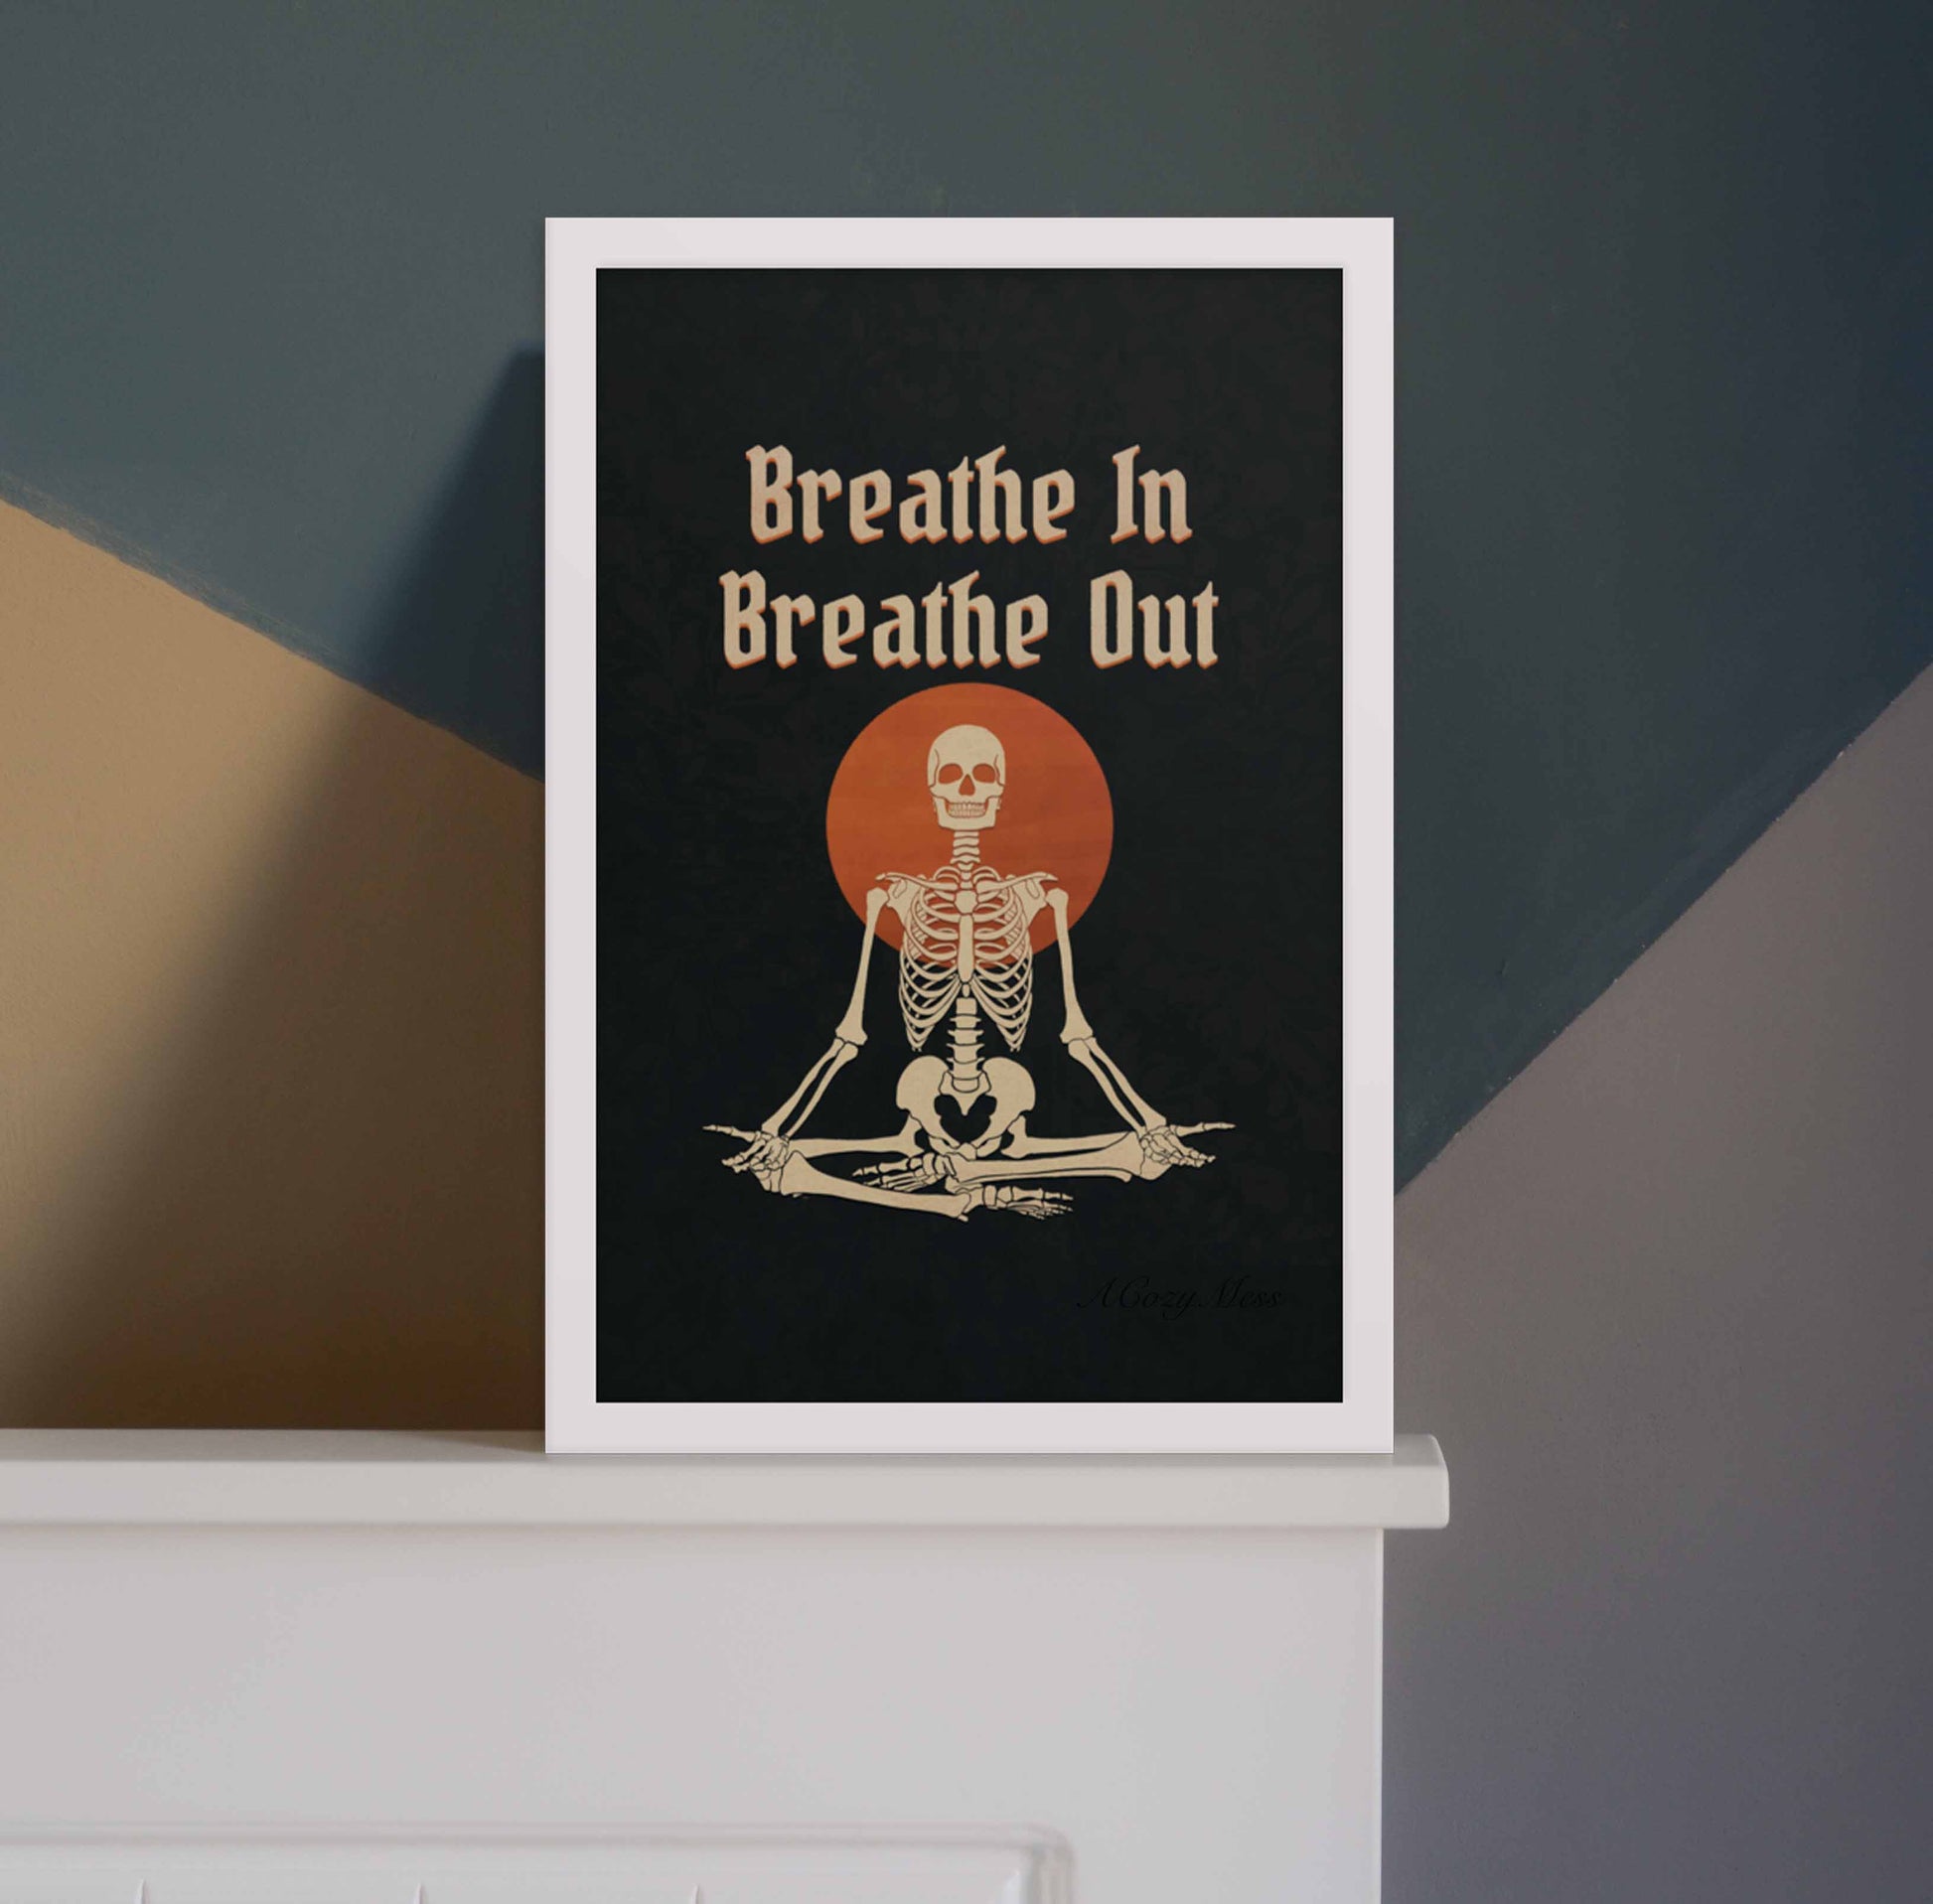 White framed wall art of " Breathe in breathe Out" with an illustration of a meditating skeleton